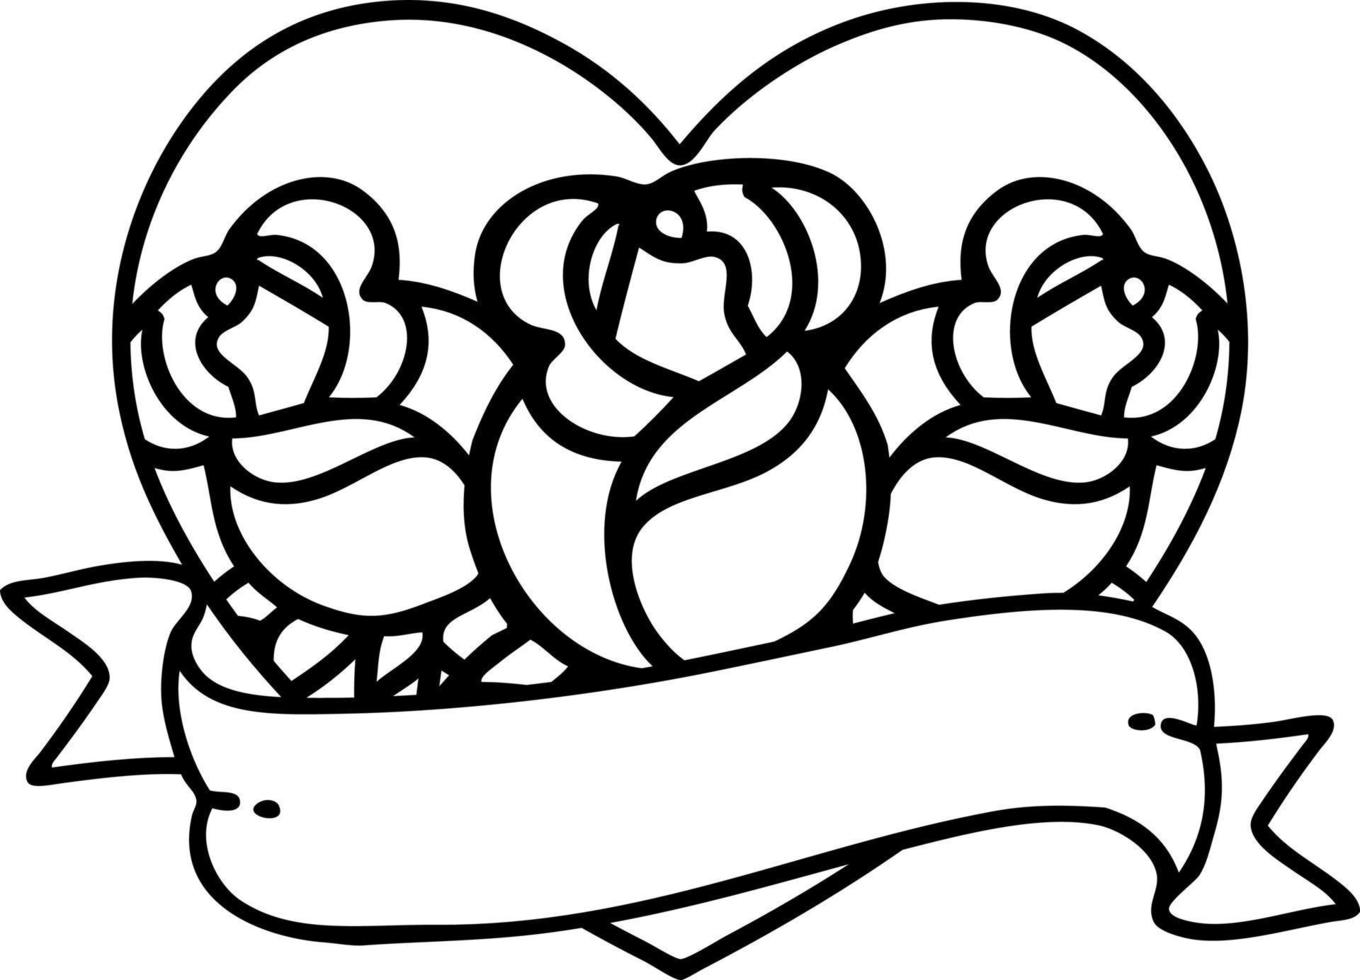 tattoo in black line style of a heart and banner with flowers vector